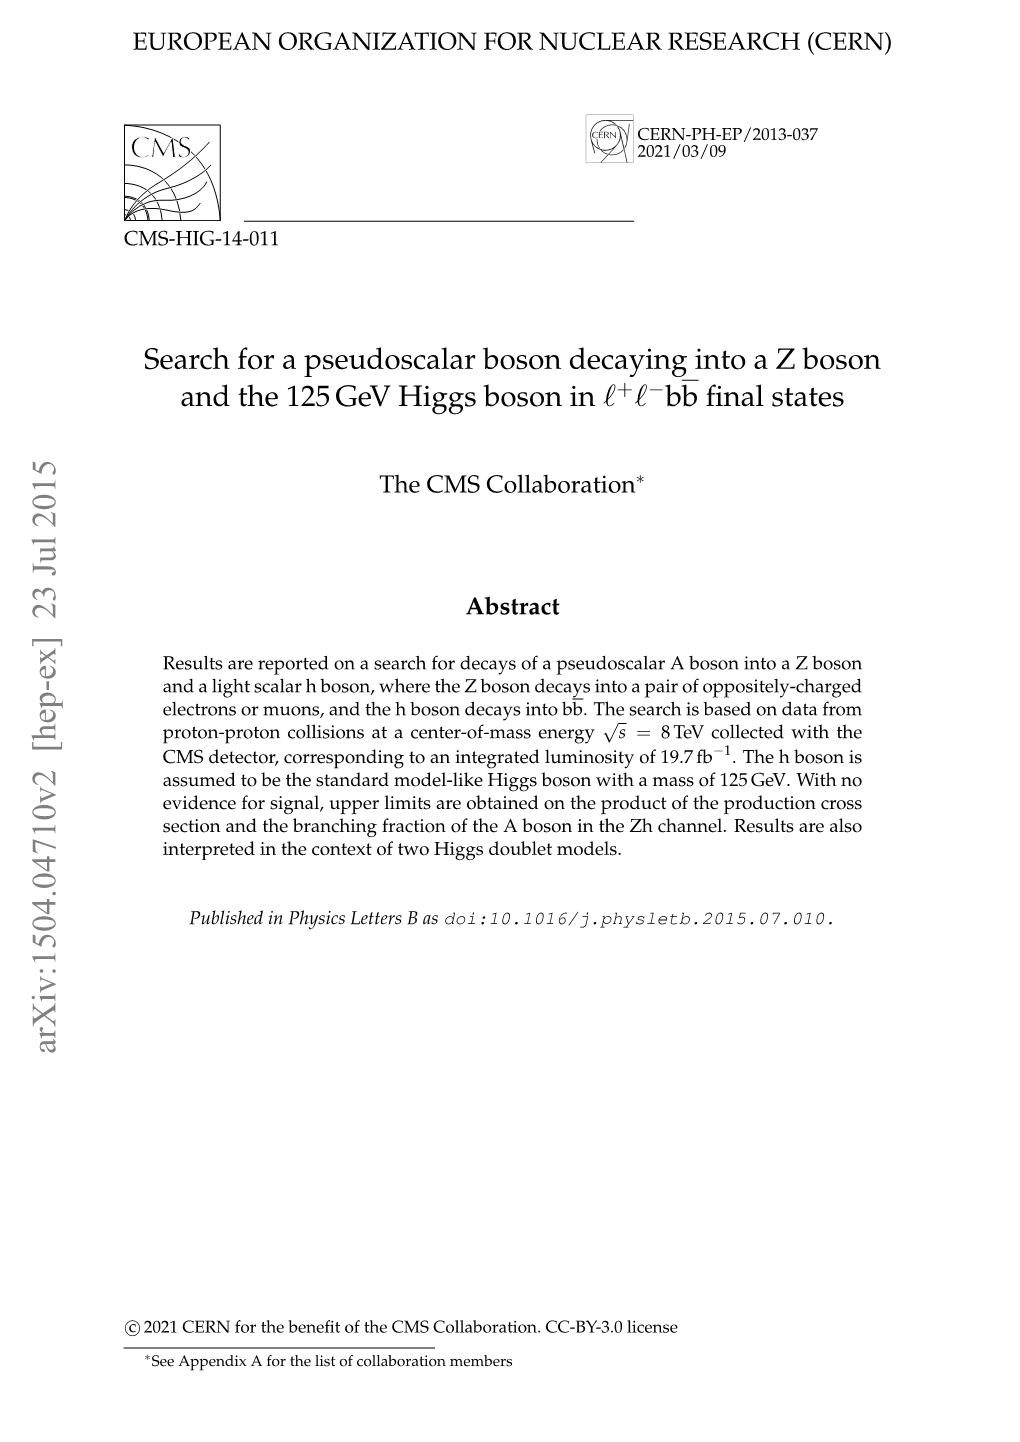 Search for a Pseudoscalar Boson Decaying Into a Z Boson and the 125 Gev Higgs Boson in `+`−Bb ﬁnal States